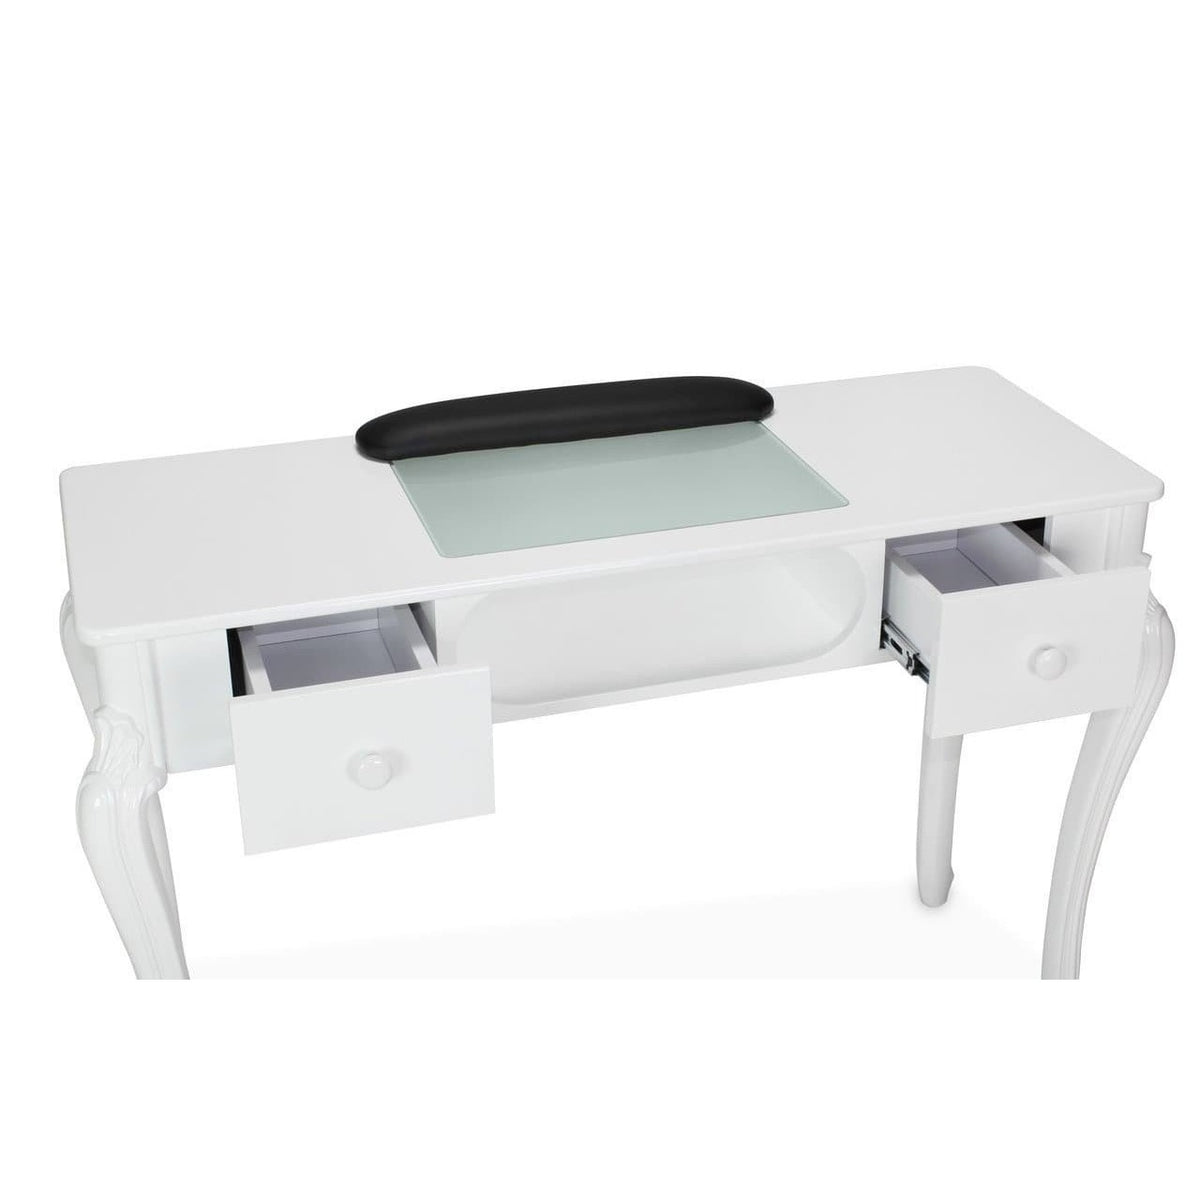 Berkeley Berkeley Fiona Manicure Table Manicure Nail Table - ChairsThatGive